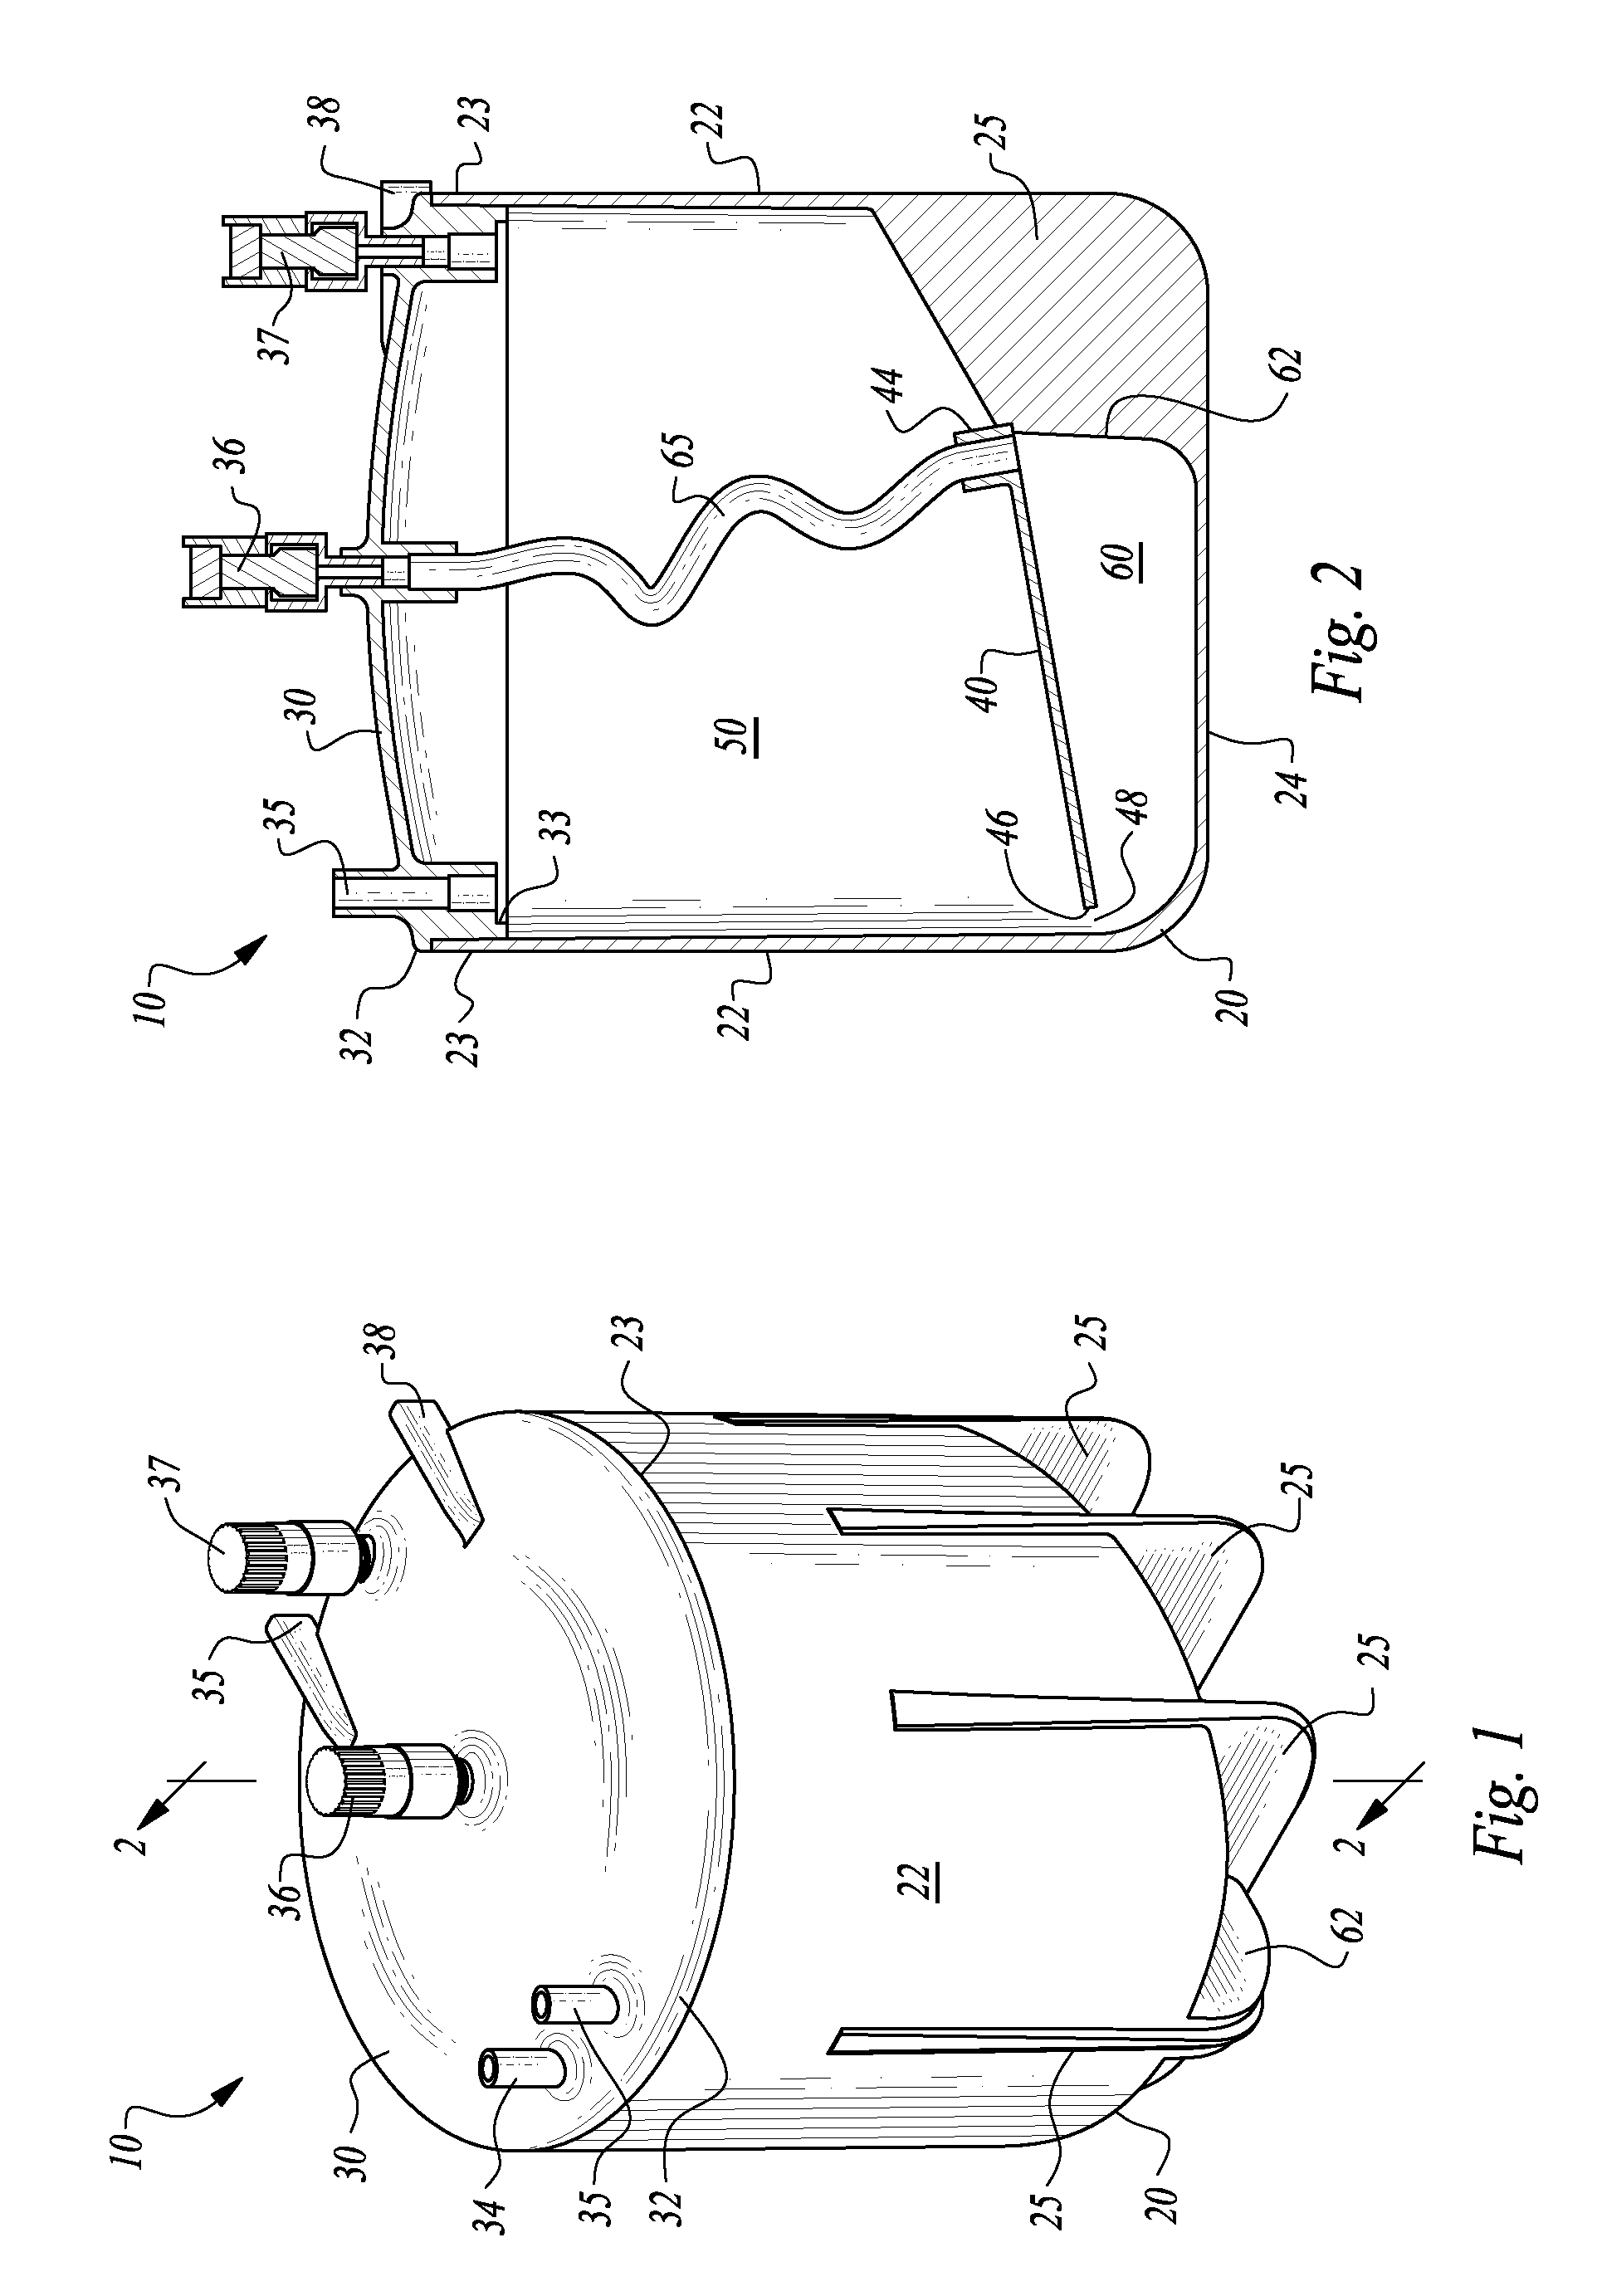 Apparatus for centrifugation and methods therefore